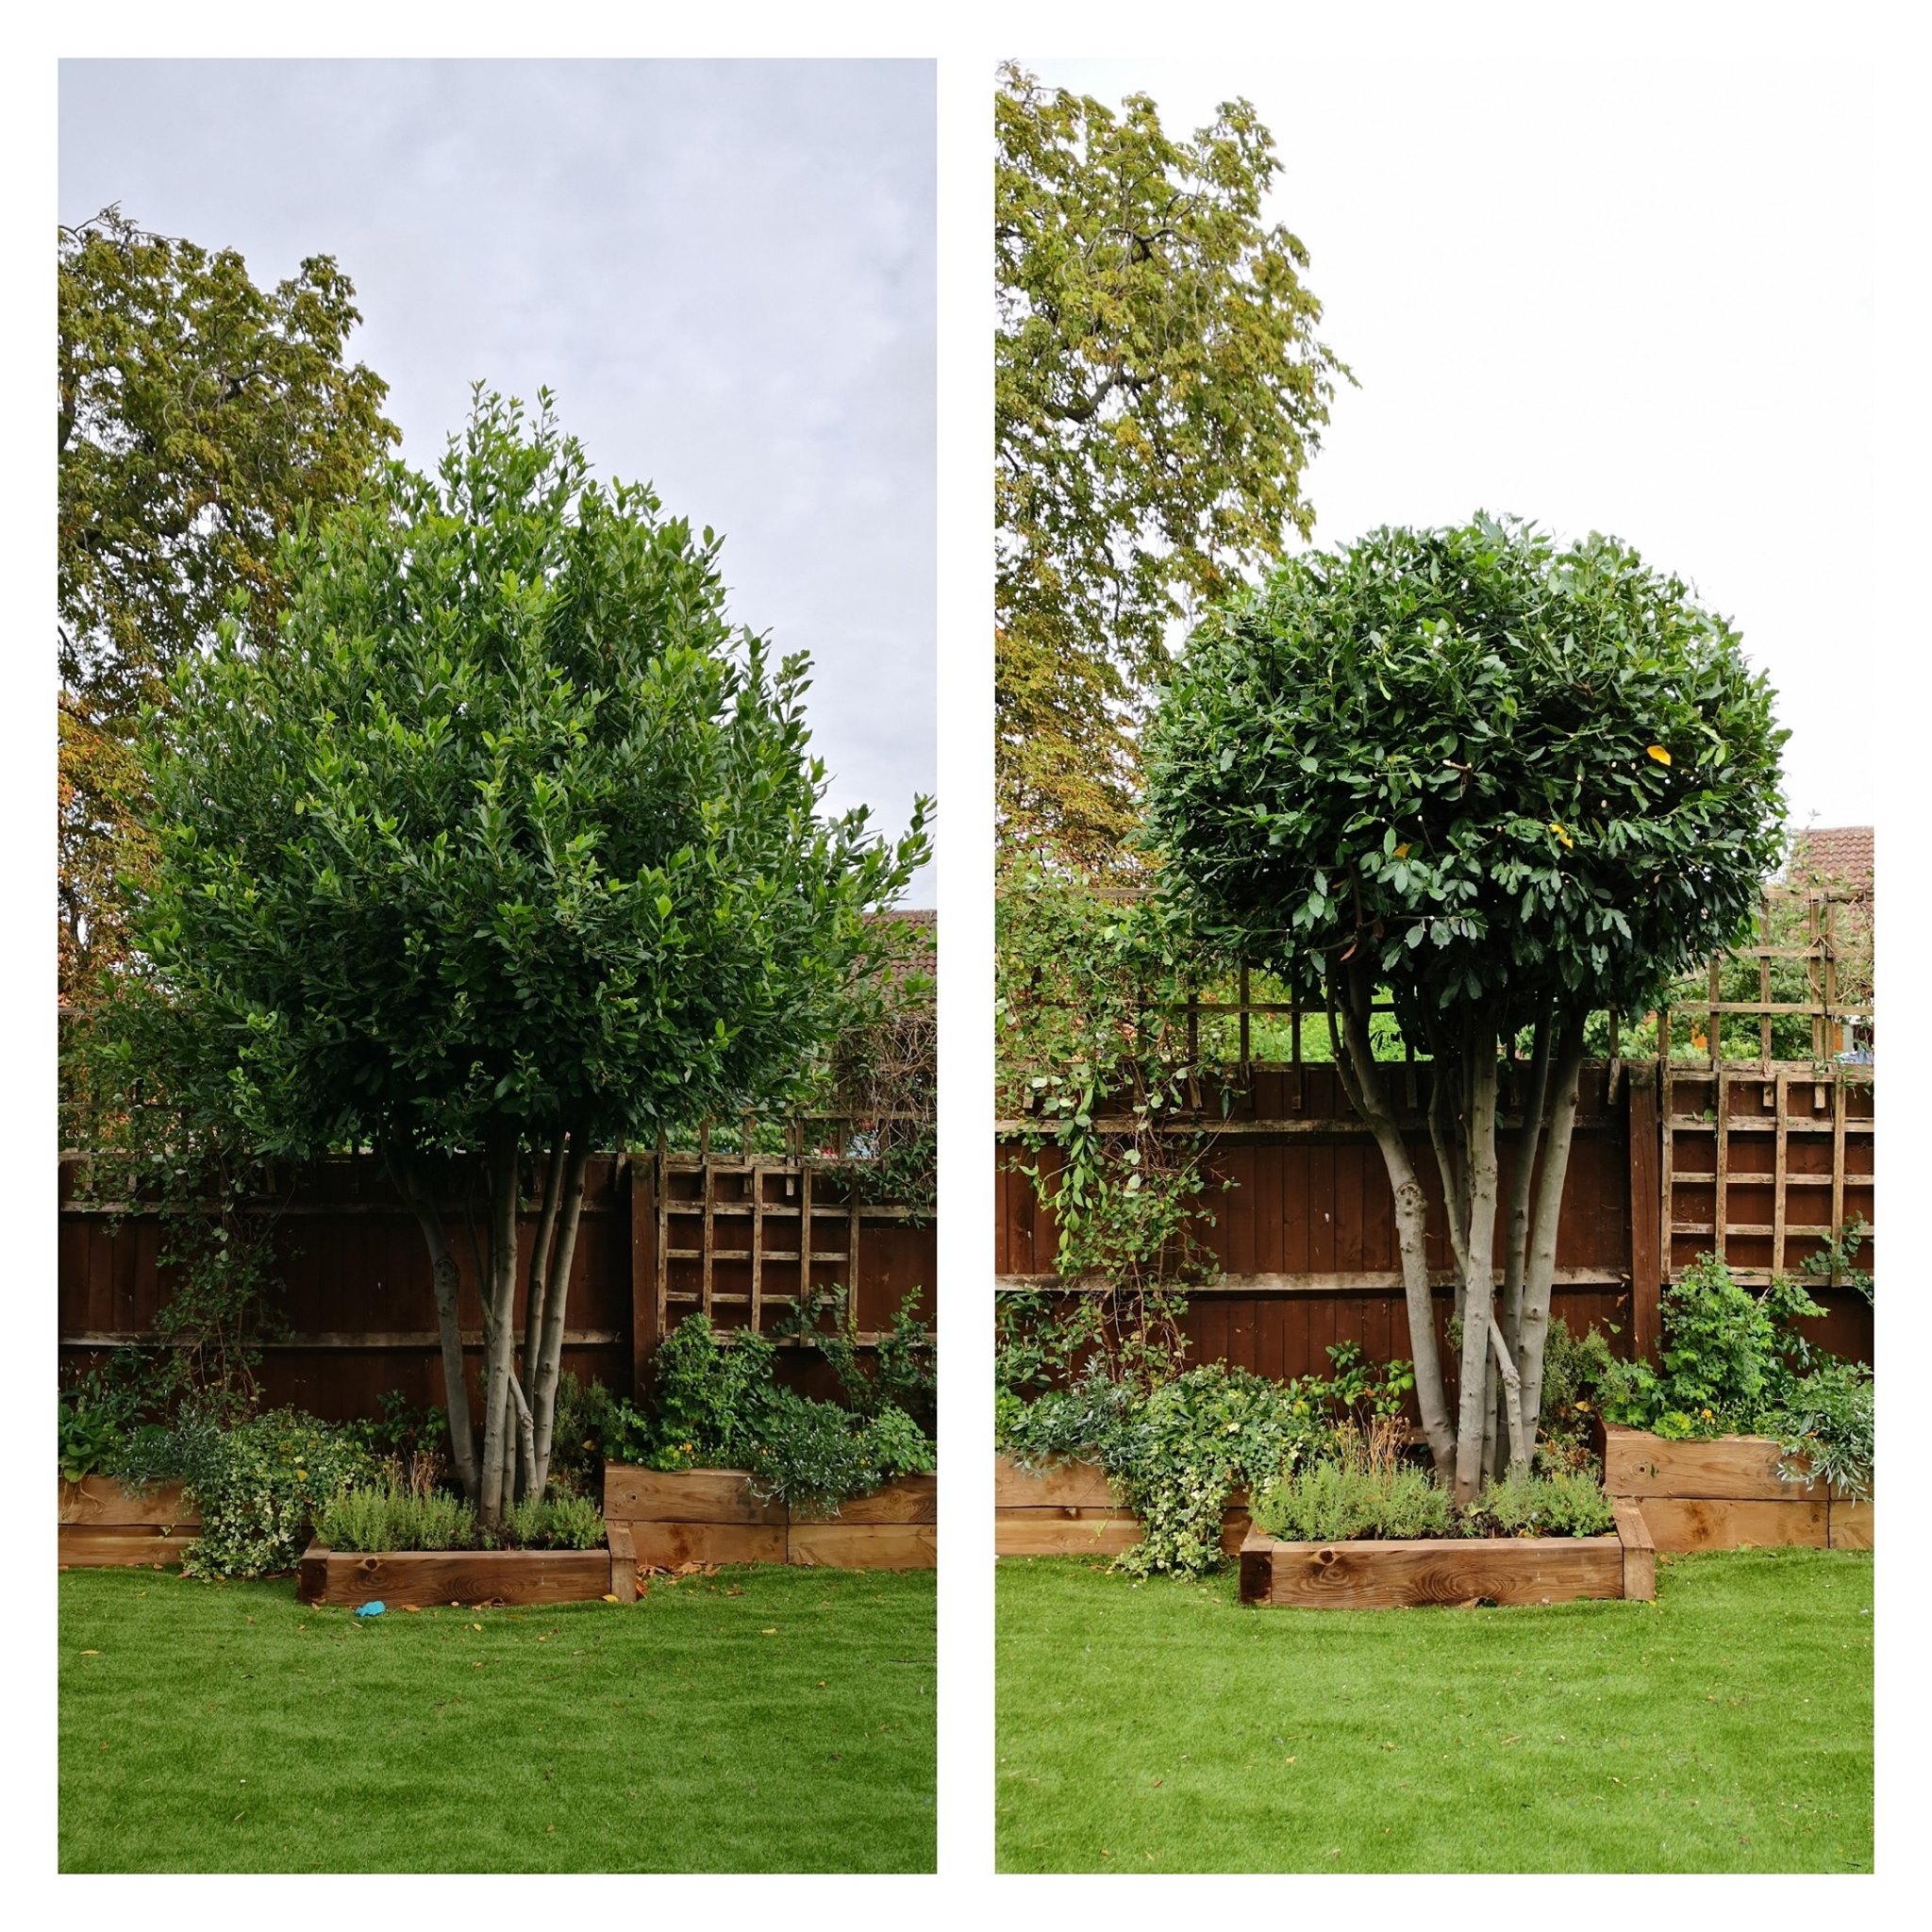 bay tree pruning final result before and after tree trimmingjon tory hedge trimming autumn tidy up hedge trimmer petrol tree ready for winter ford ranger tree trimming and pruning under way. Ladder tree work hedge shaping pruning pollarding height management green waste disposal service